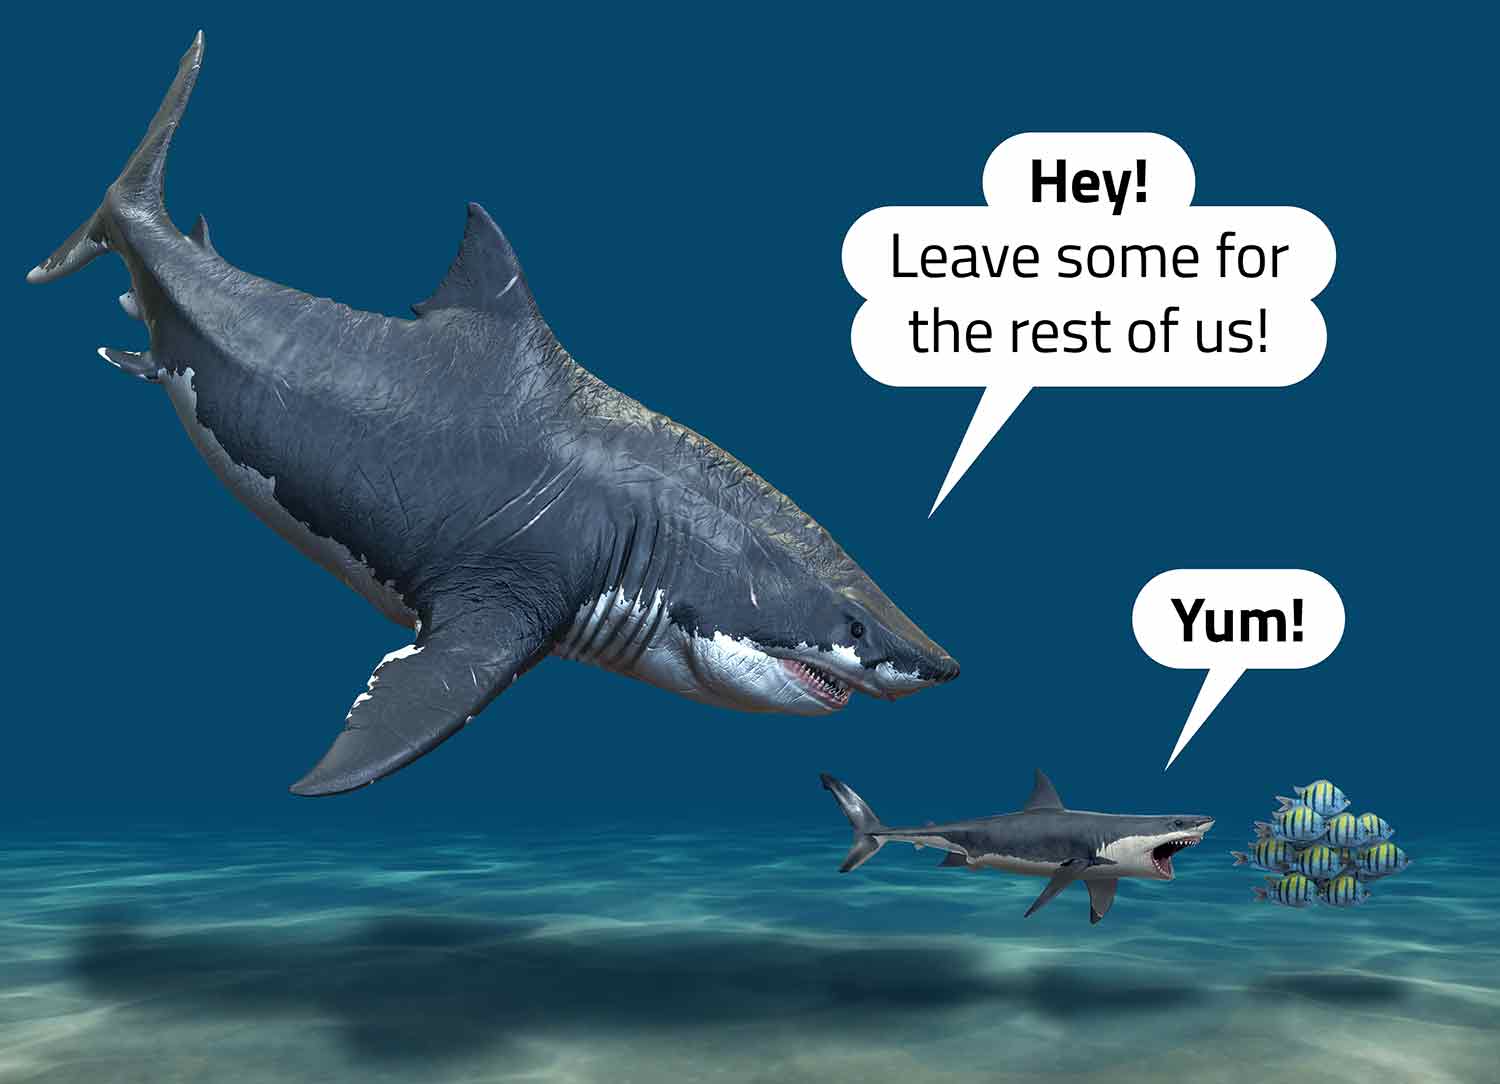 A great white shark pursues a school of fish and says yum while a megalodon says, “Hey, leave some for the rest of us.”